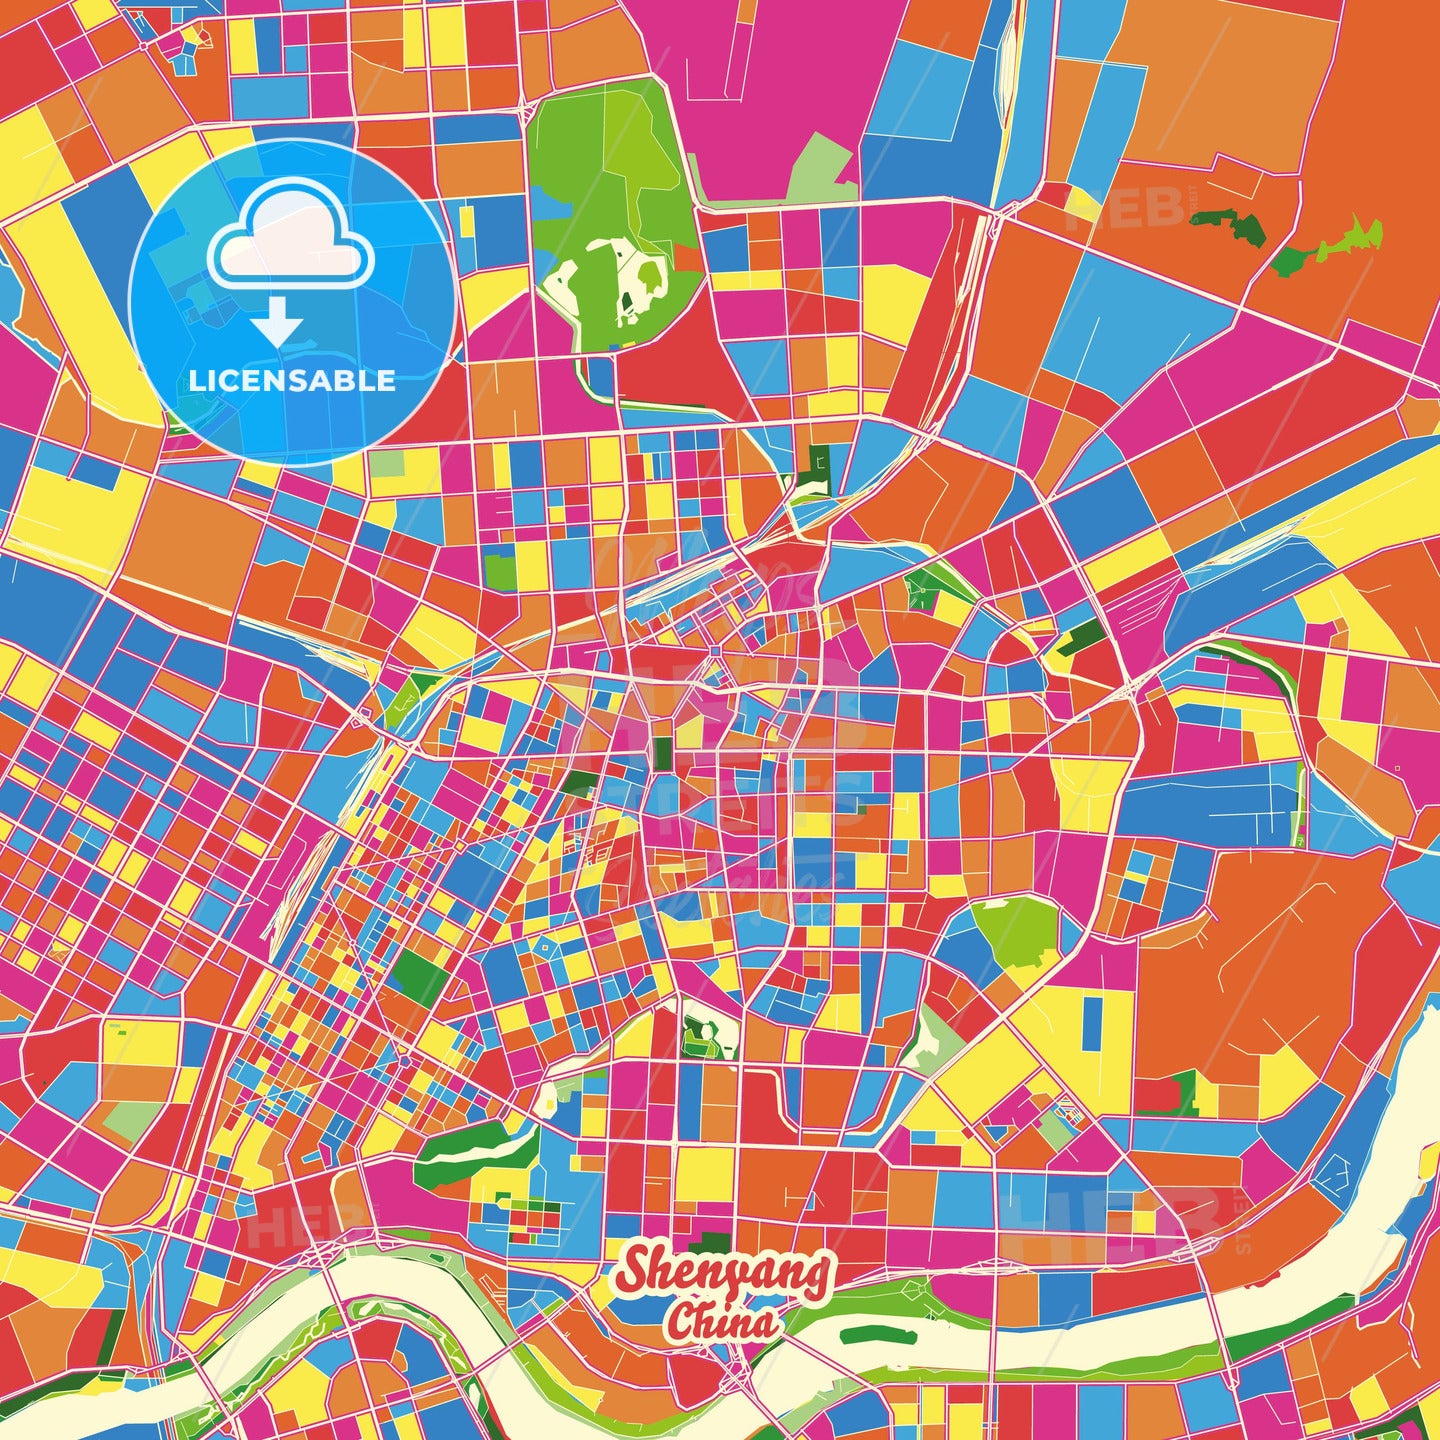 Shenyang, China Crazy Colorful Street Map Poster Template - HEBSTREITS Sketches